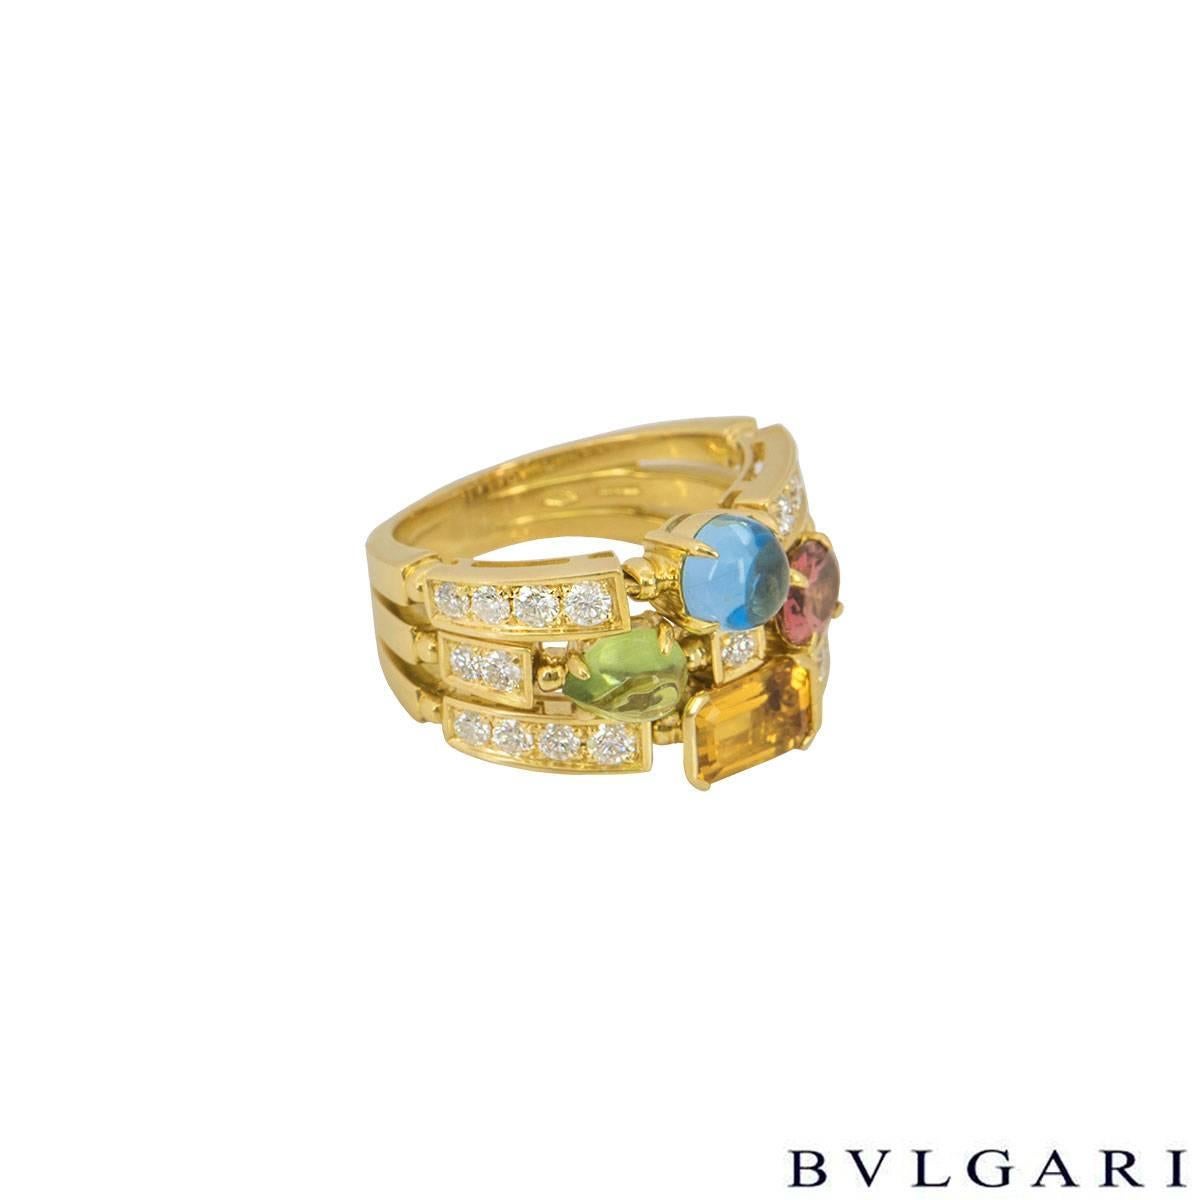 An elegant 18k yellow gold Bvlgari ring from the Allegra collection. The ring compromises of a 3 band setting featuring 4 semi-precious gemstones including pink tourmaline, peridot, citrine quartz and blue topaz. The gemstones are complimented by 21